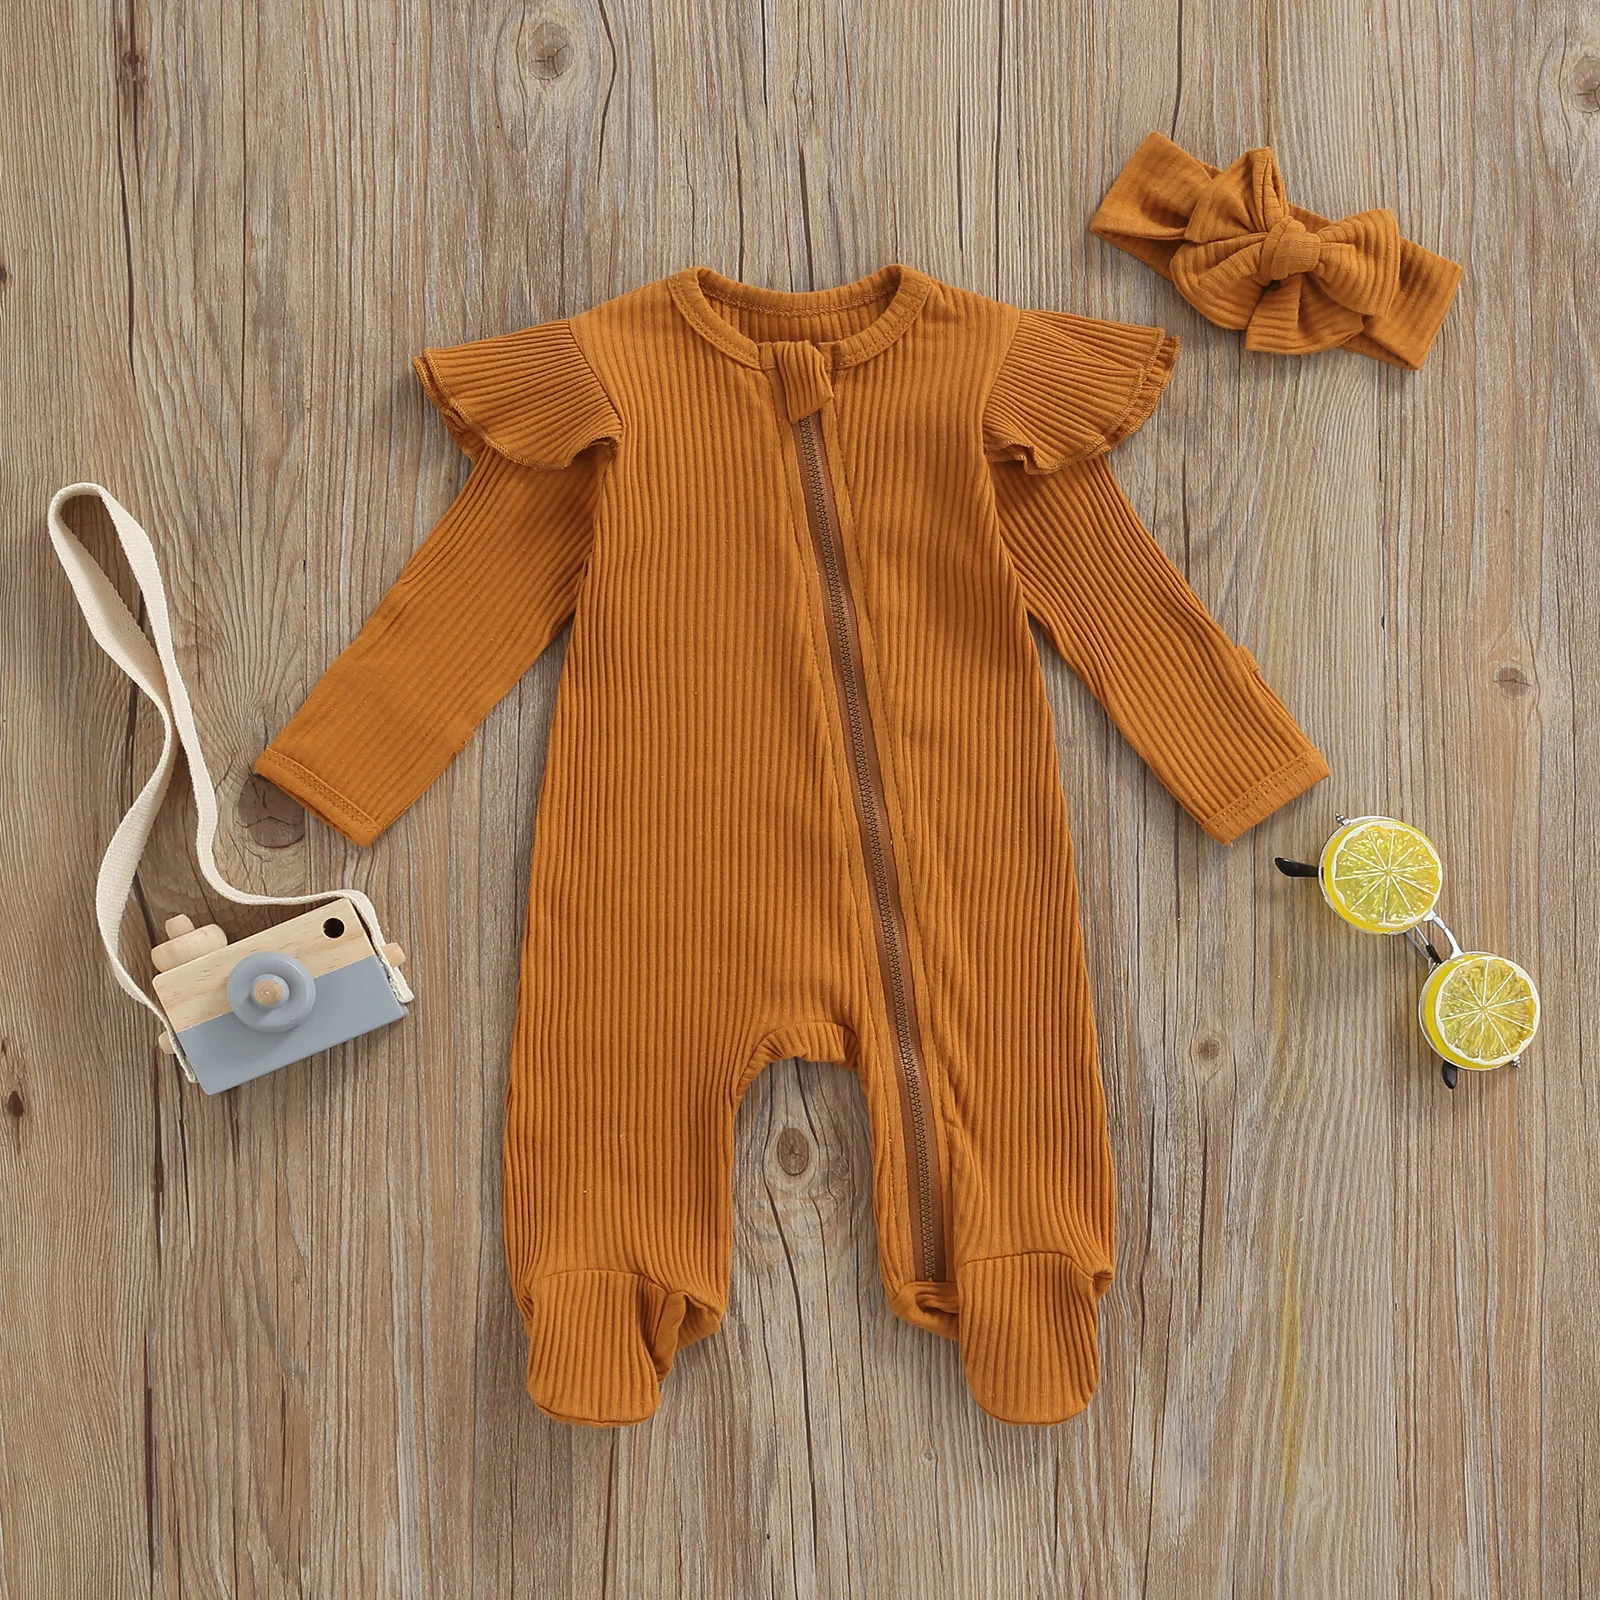 Ma&Baby 0-6M Newborn Infant Baby Girls Jumpsuit Knitted Soft Ruffles Long Sleeve Romper Playsuit Autumn Spring Baby Clothing D35 cute baby bodysuits